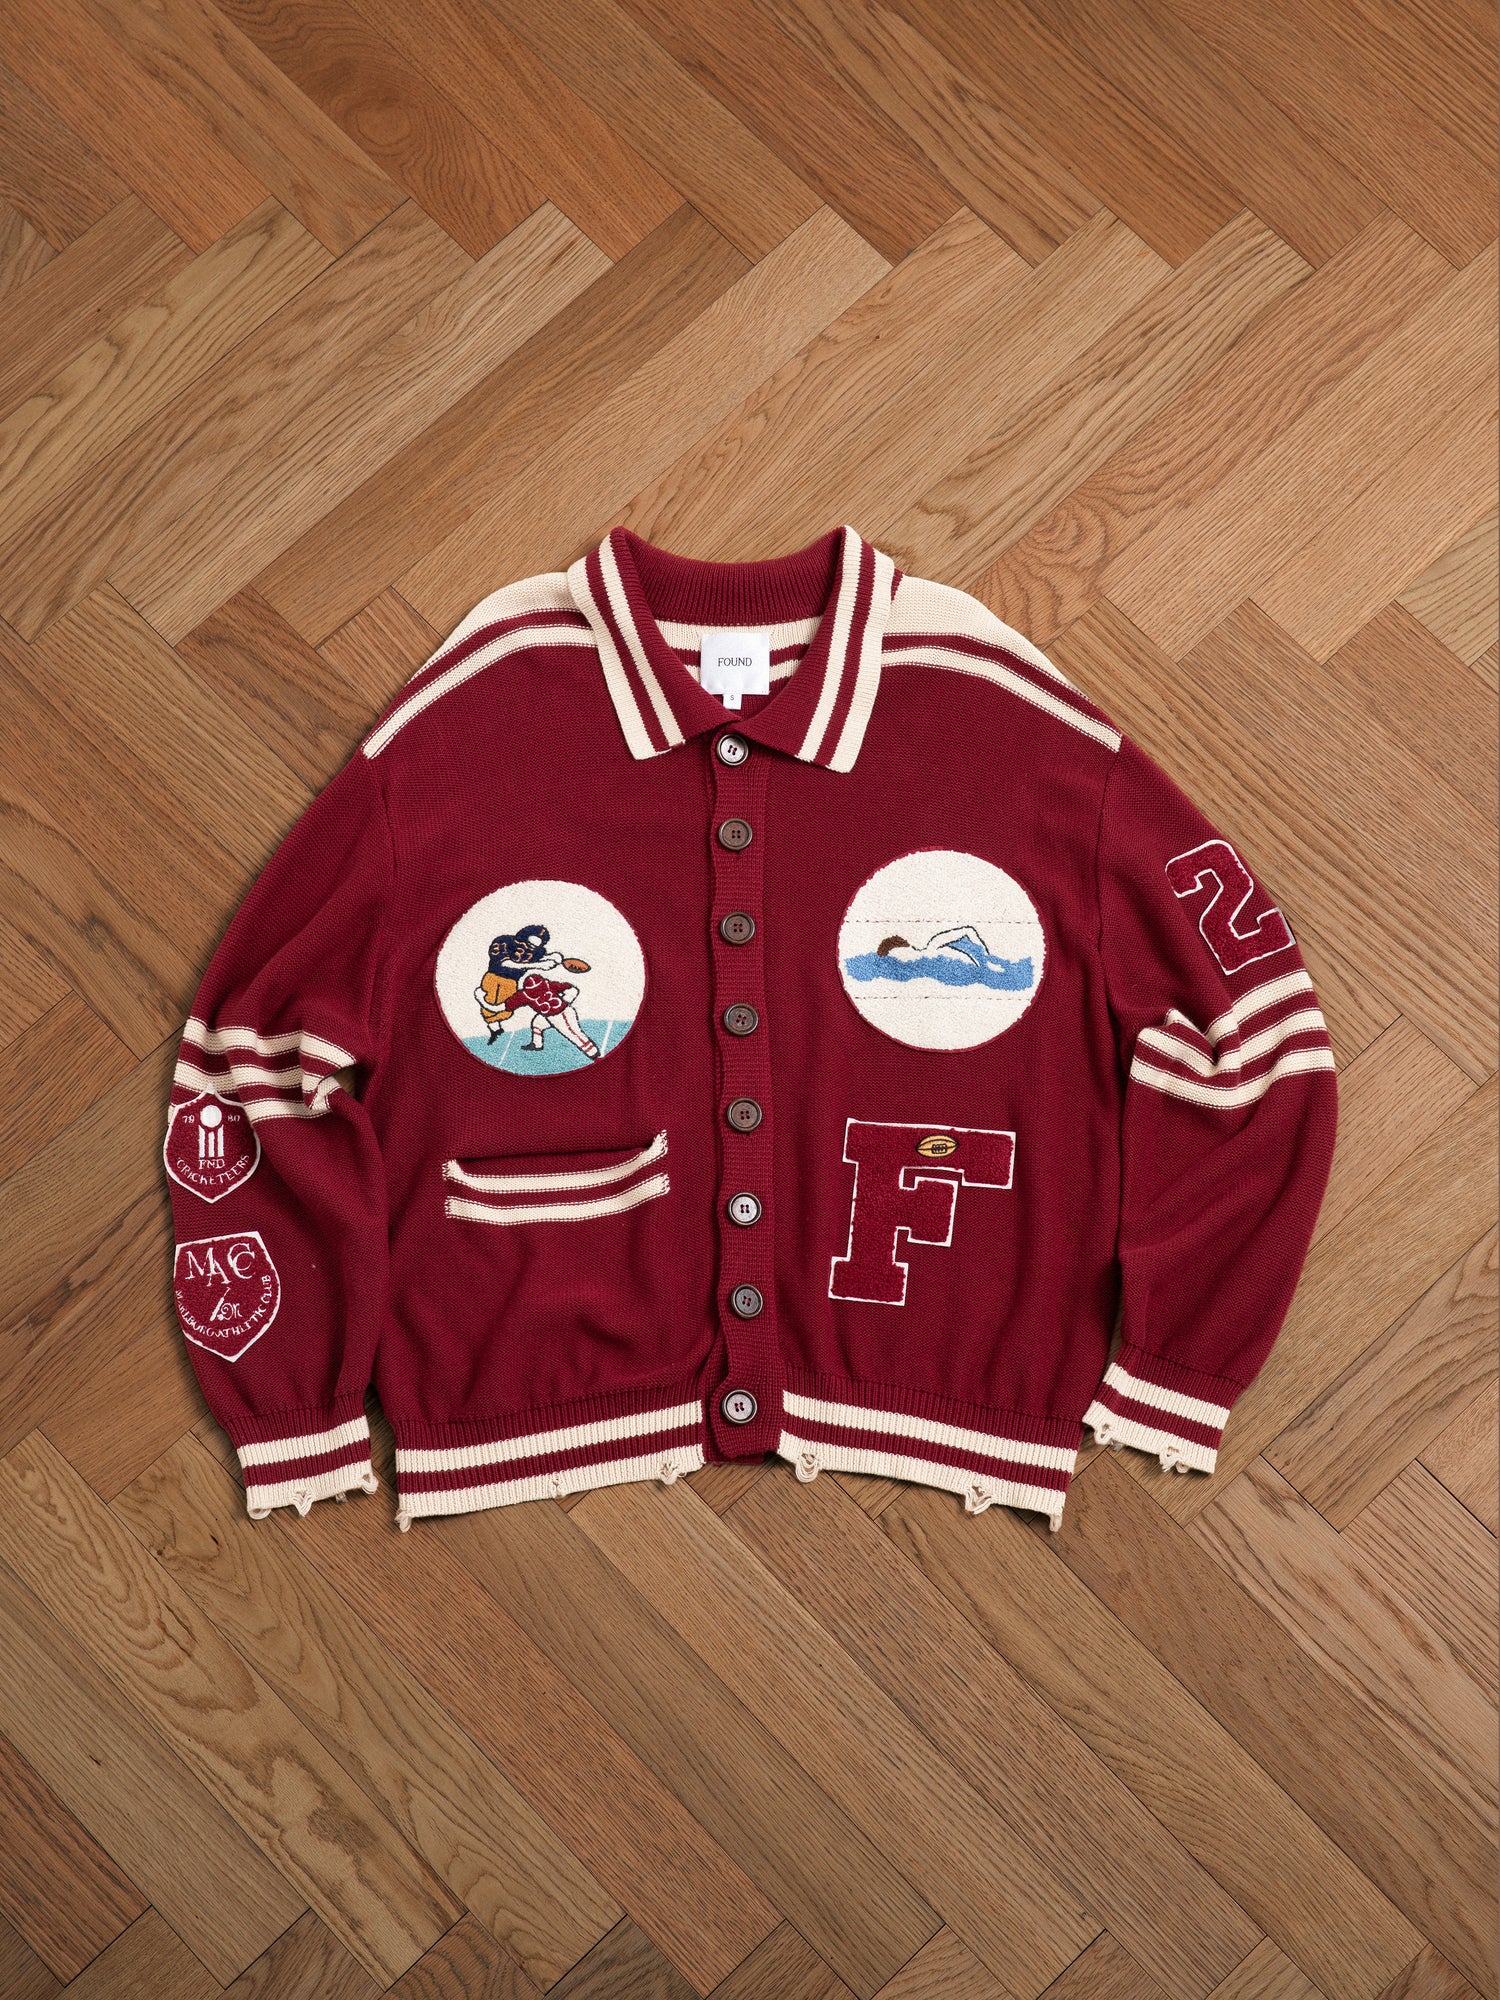 A maroon sweater with embroidered chenille patches on it, embracing the vintage Ivy League fashion, from Found featuring the Fin Varsity Patch Collared Cardigan.